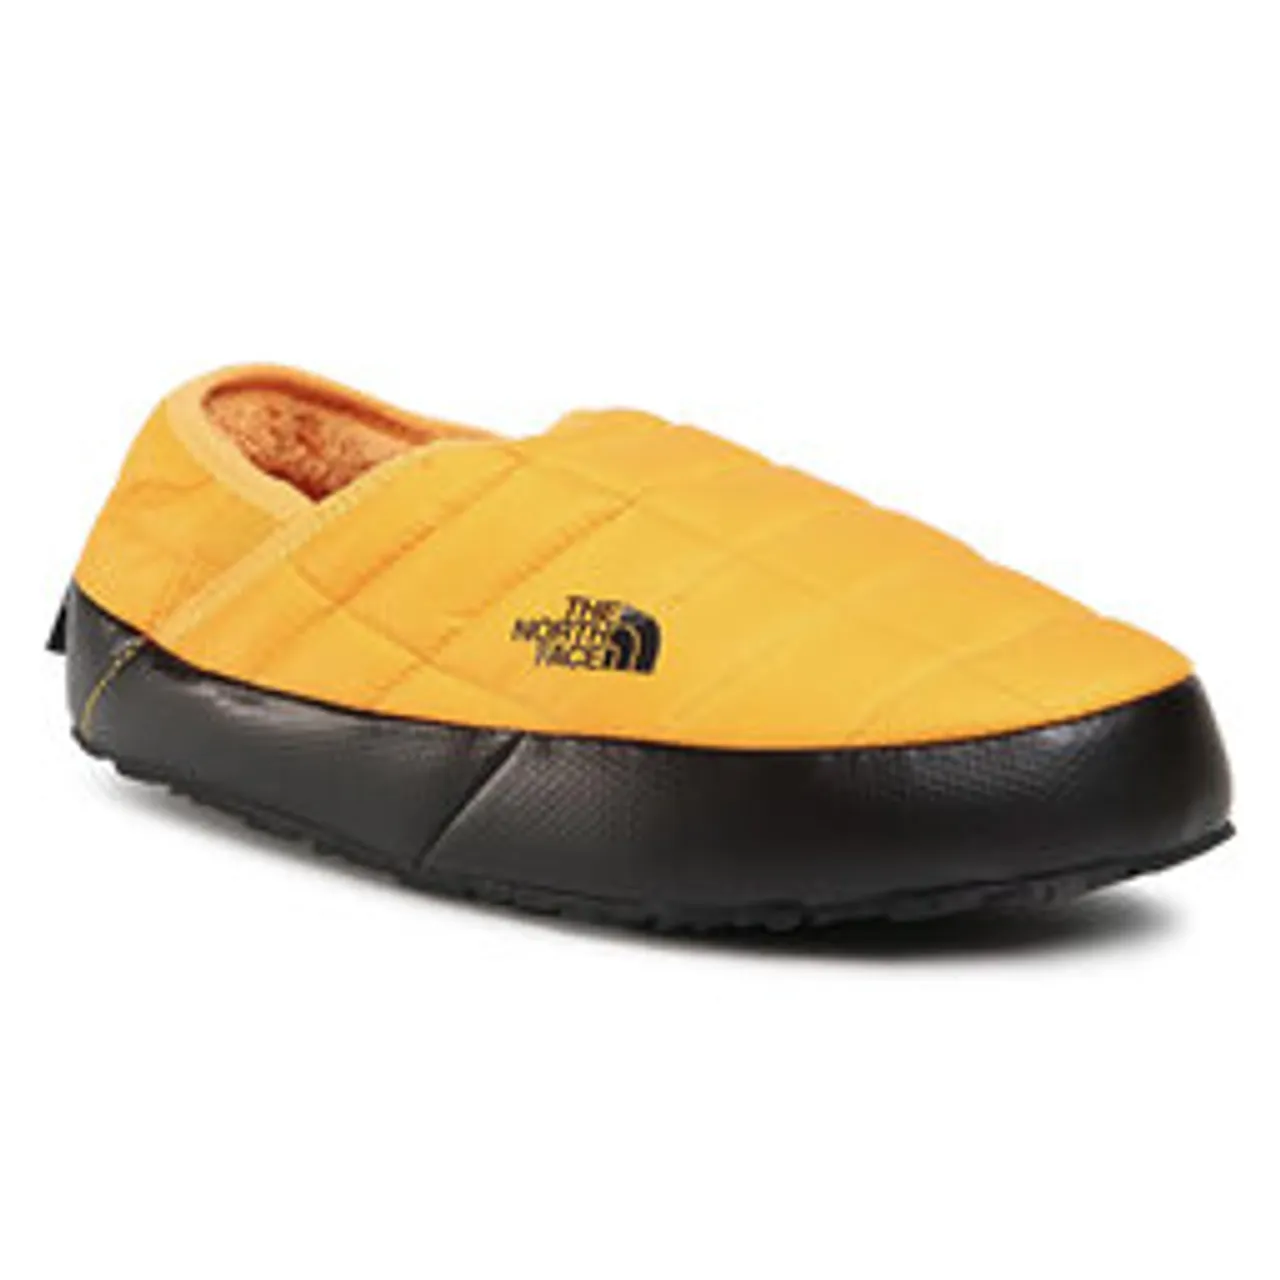 Hausschuhe The North Face Thermoball Traction Mule V NF0A3UZNZU31 Summit Gold/Tnf Black